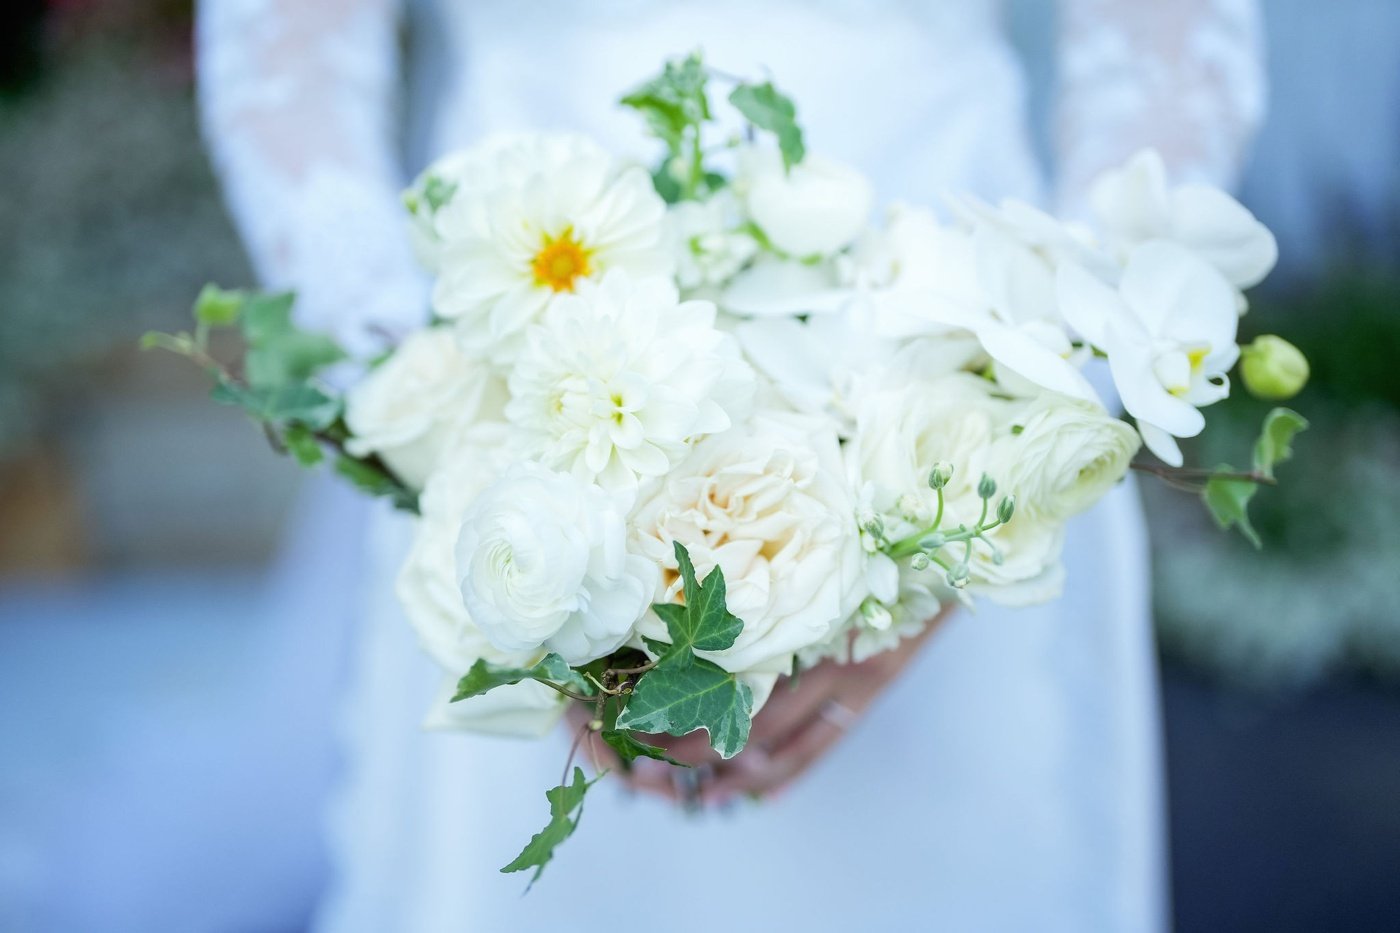 A bridal bouquet filled with white roses, ranunculus, and dahlias by Botanique of Cape Cod